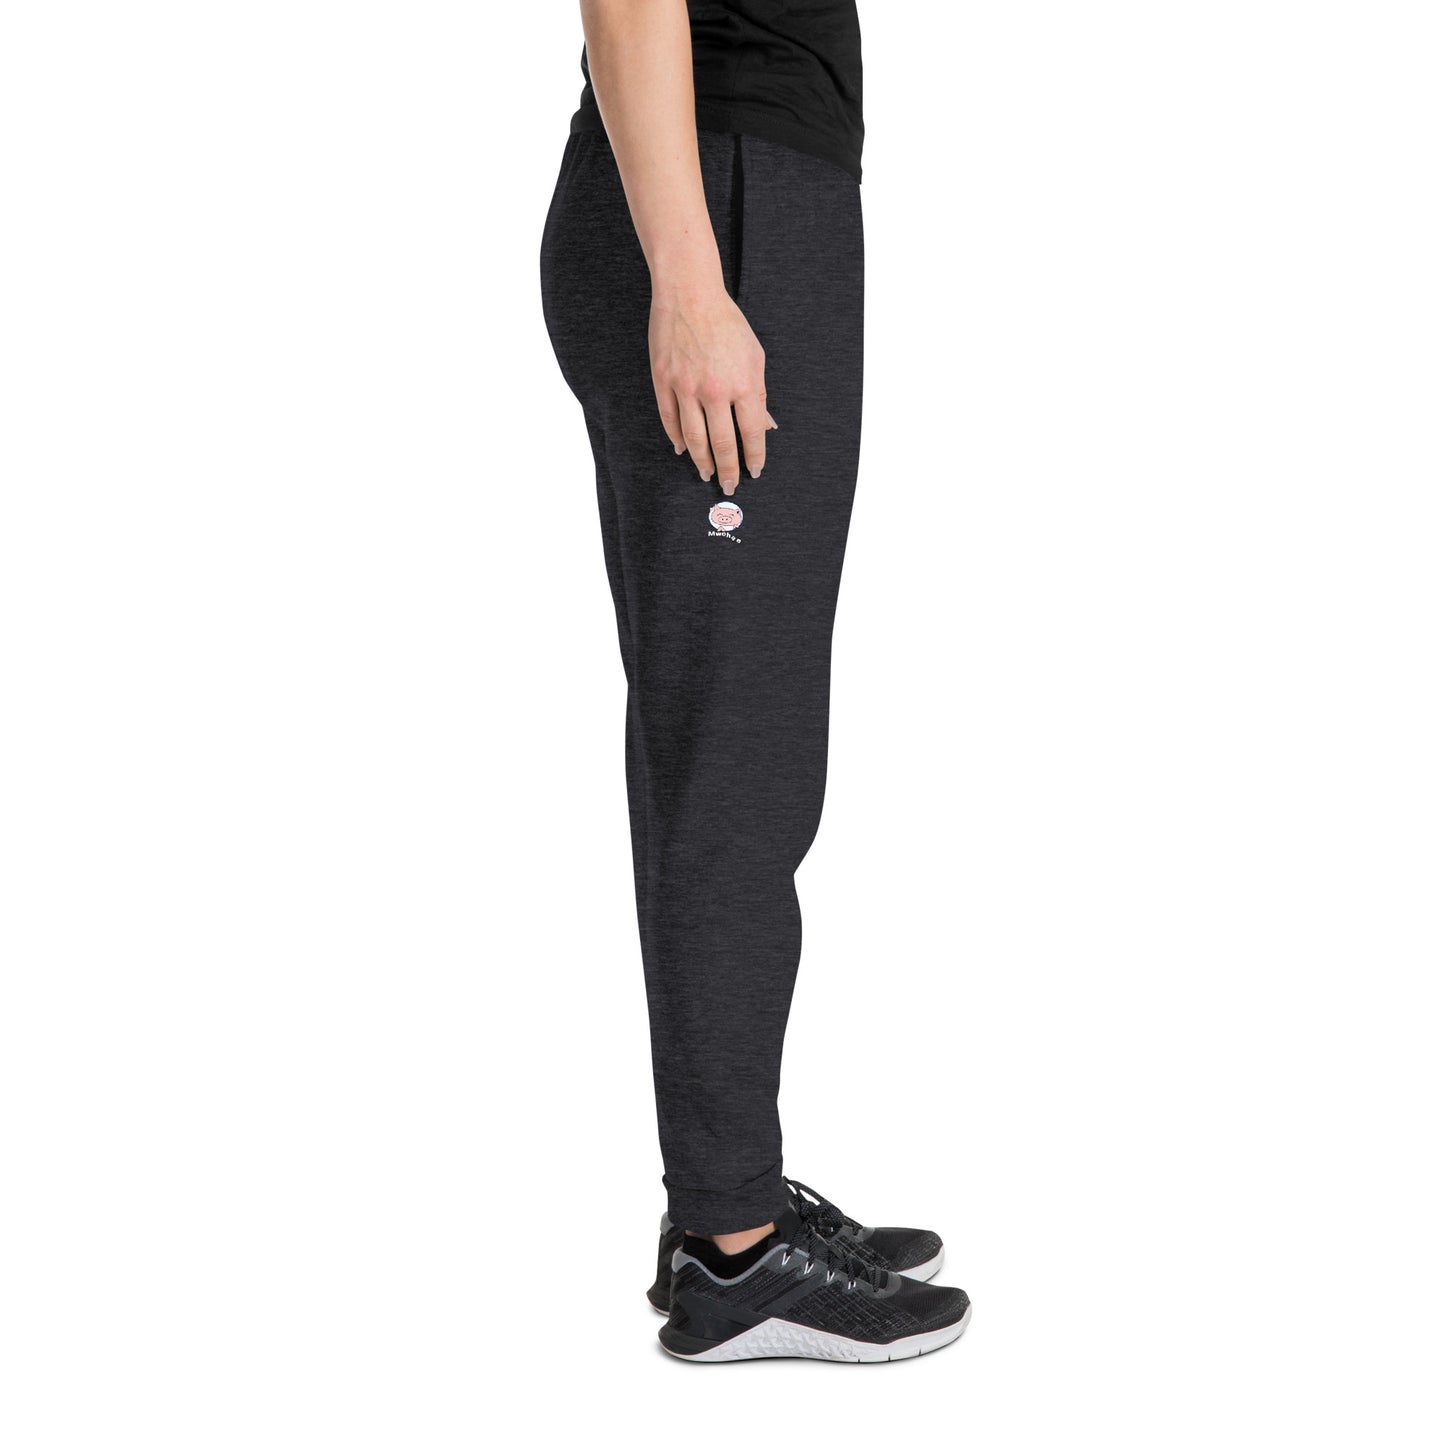 Black heather joggers with small Mwohae logo on the right leg